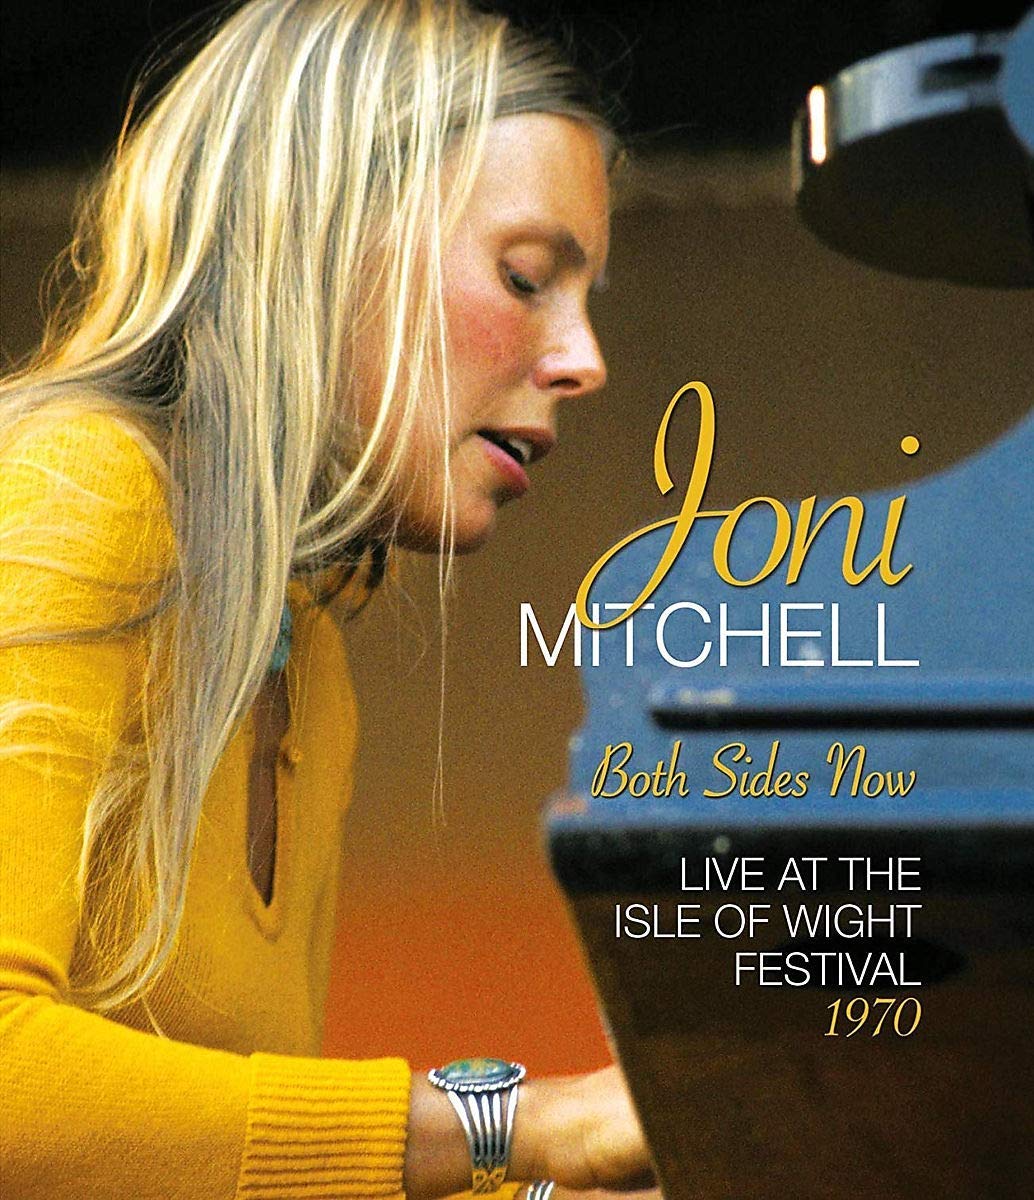 JONI MITCHELL / ジョニ・ミッチェル / BOTH SIDES NOW - LIVE AT THE ISLE OF WIGHT FESTIVAL 1970 (BLU-RAY)